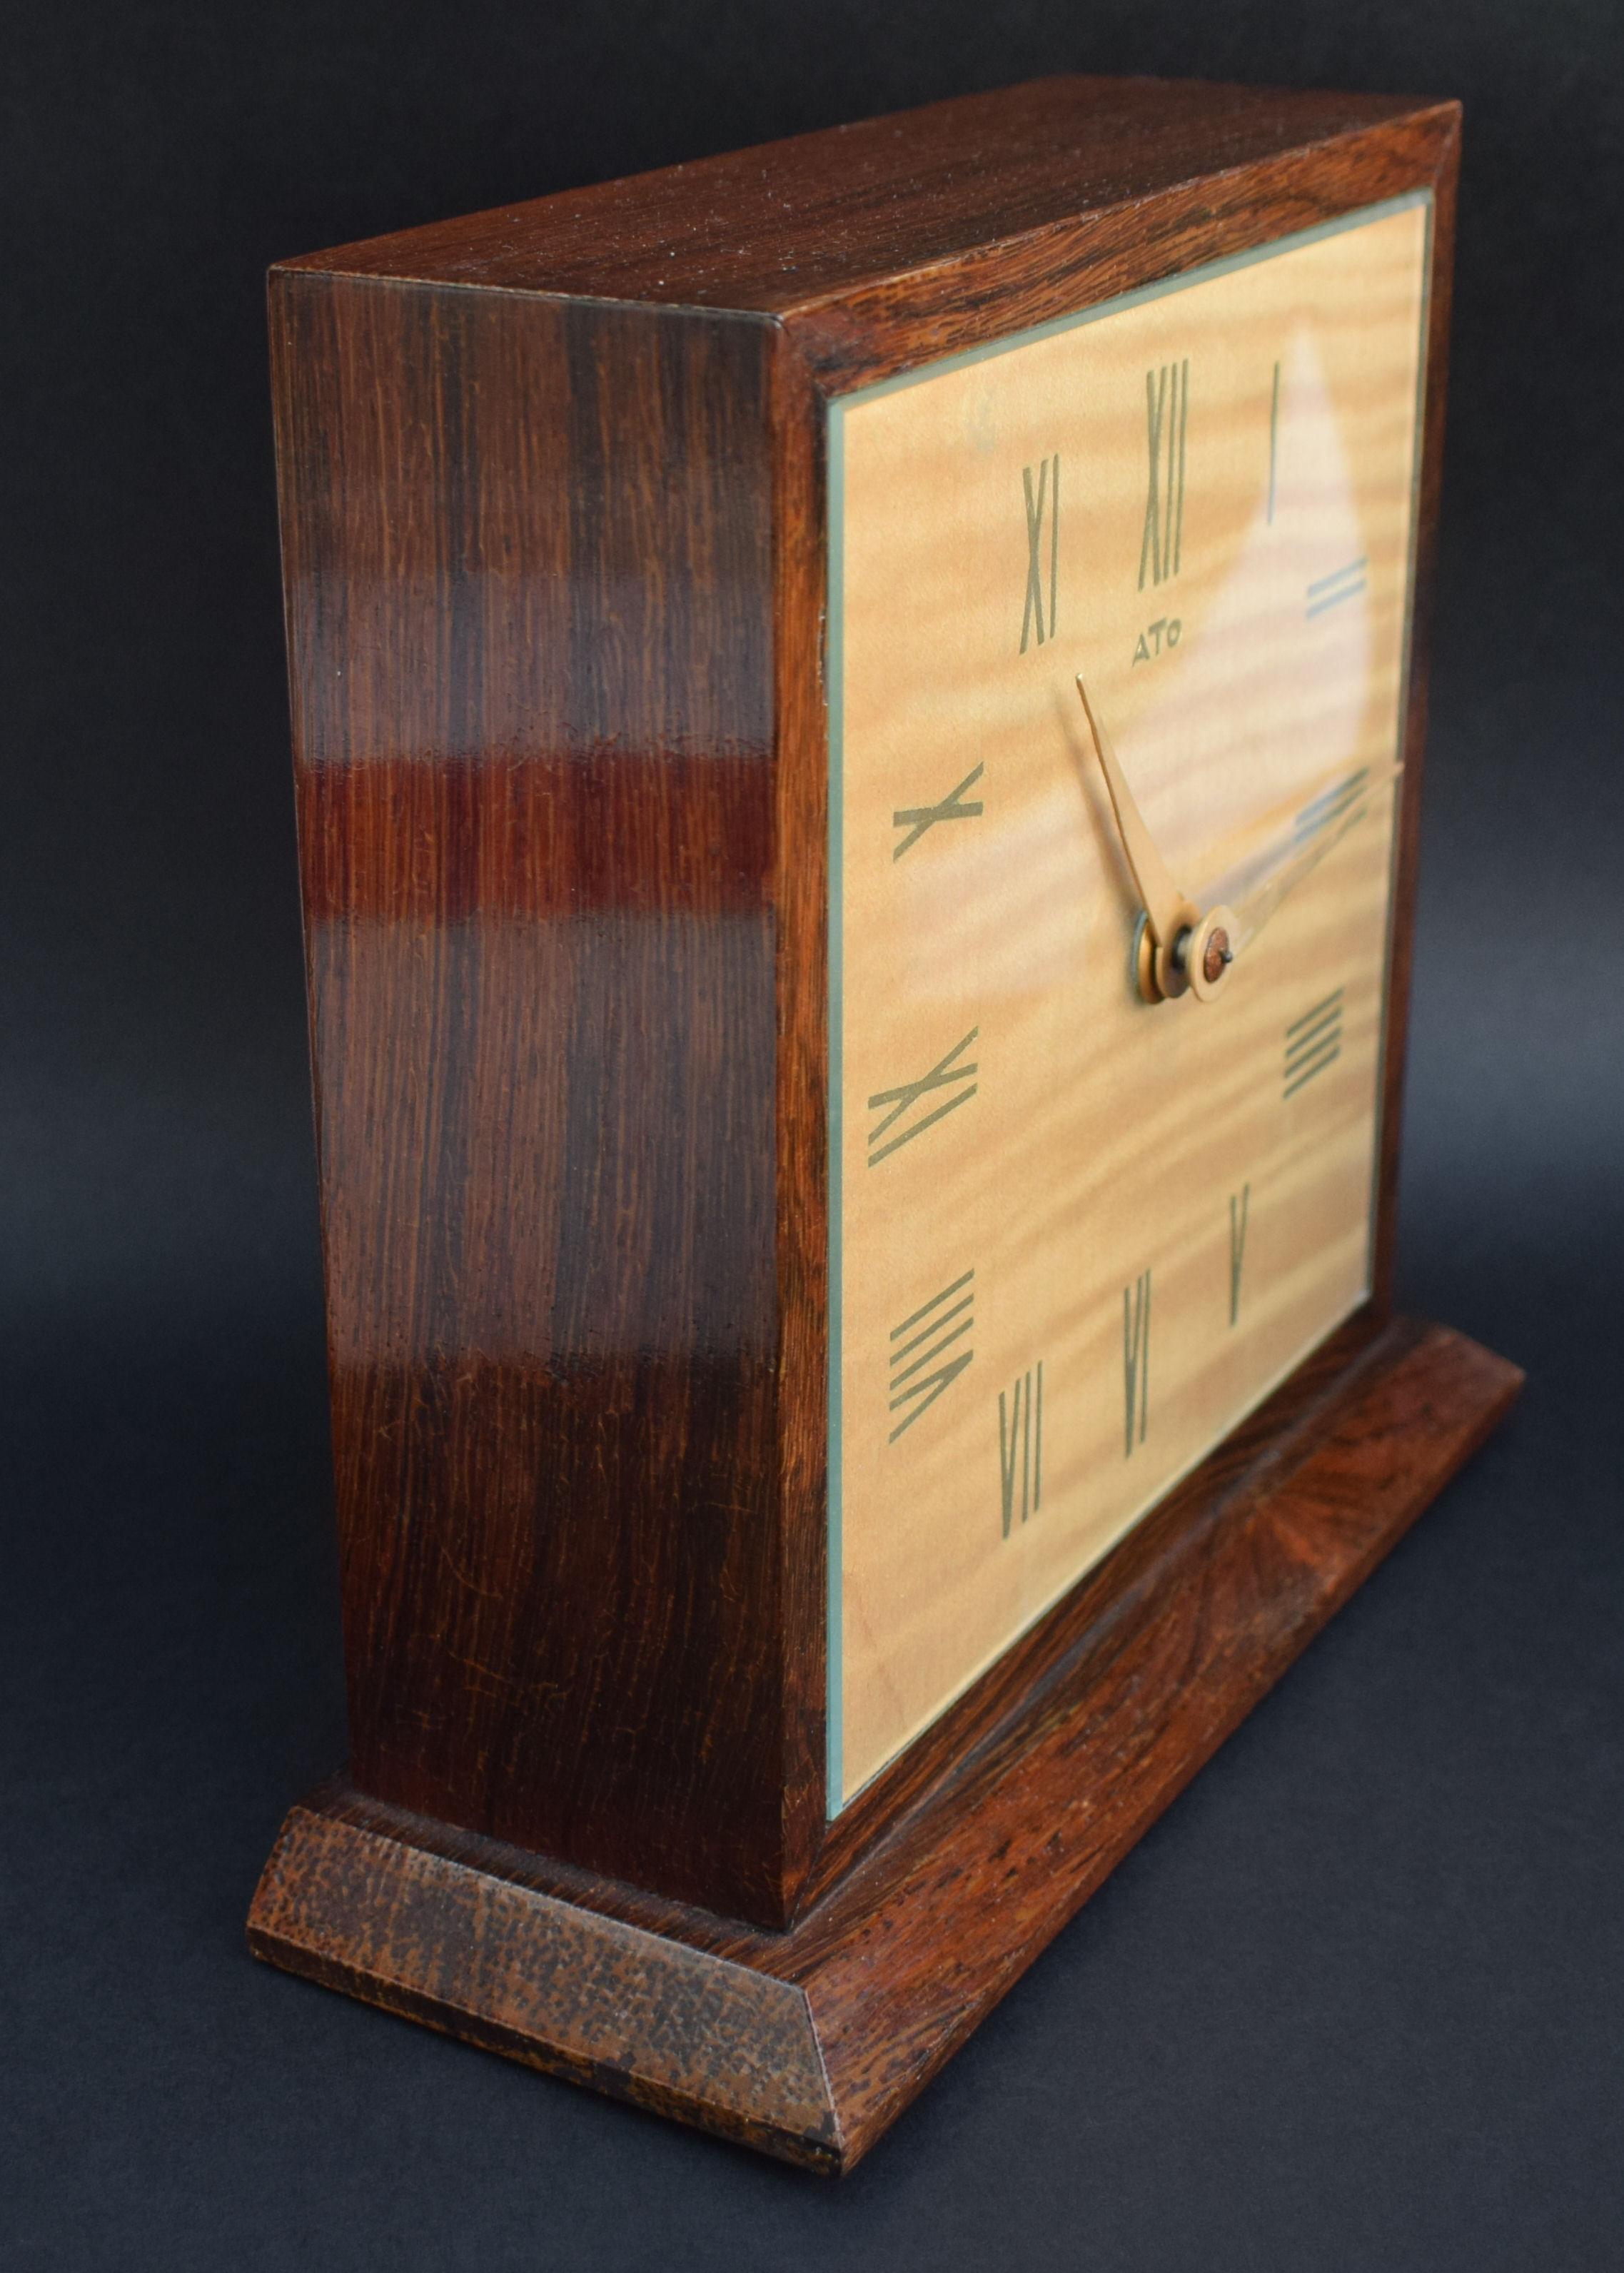 Glass Art Deco Modernist Mantle Clock by ATO, 1930s